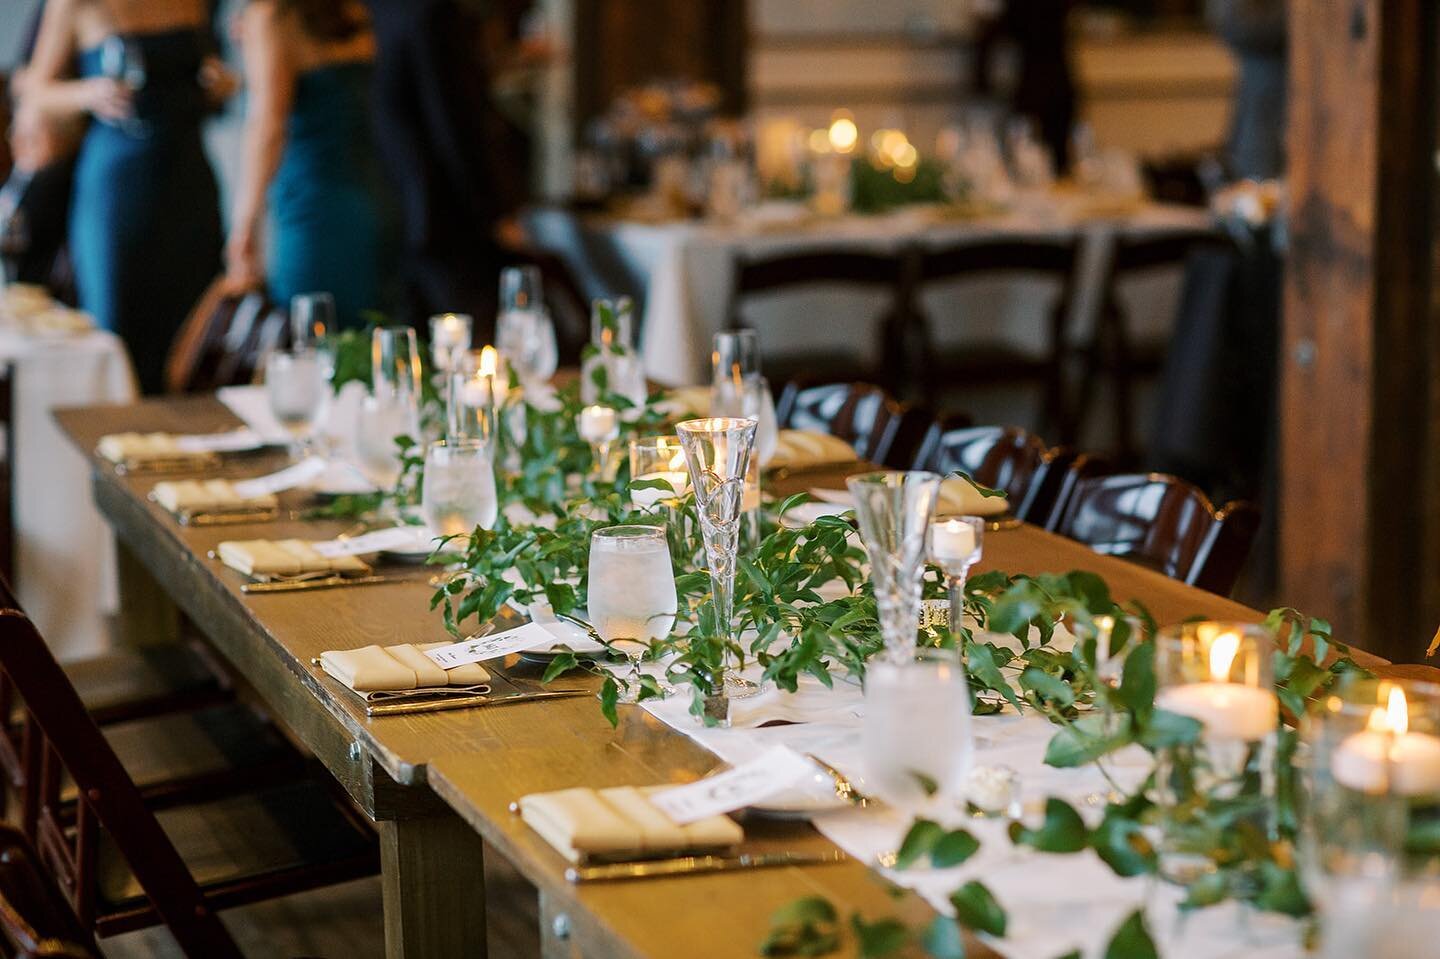 We love to see place settings that embrace the charm of this space and add a touch of elegance - simple greenery, soft napkins, and some extra fancy toasting glasses! 
photo | @claireryser